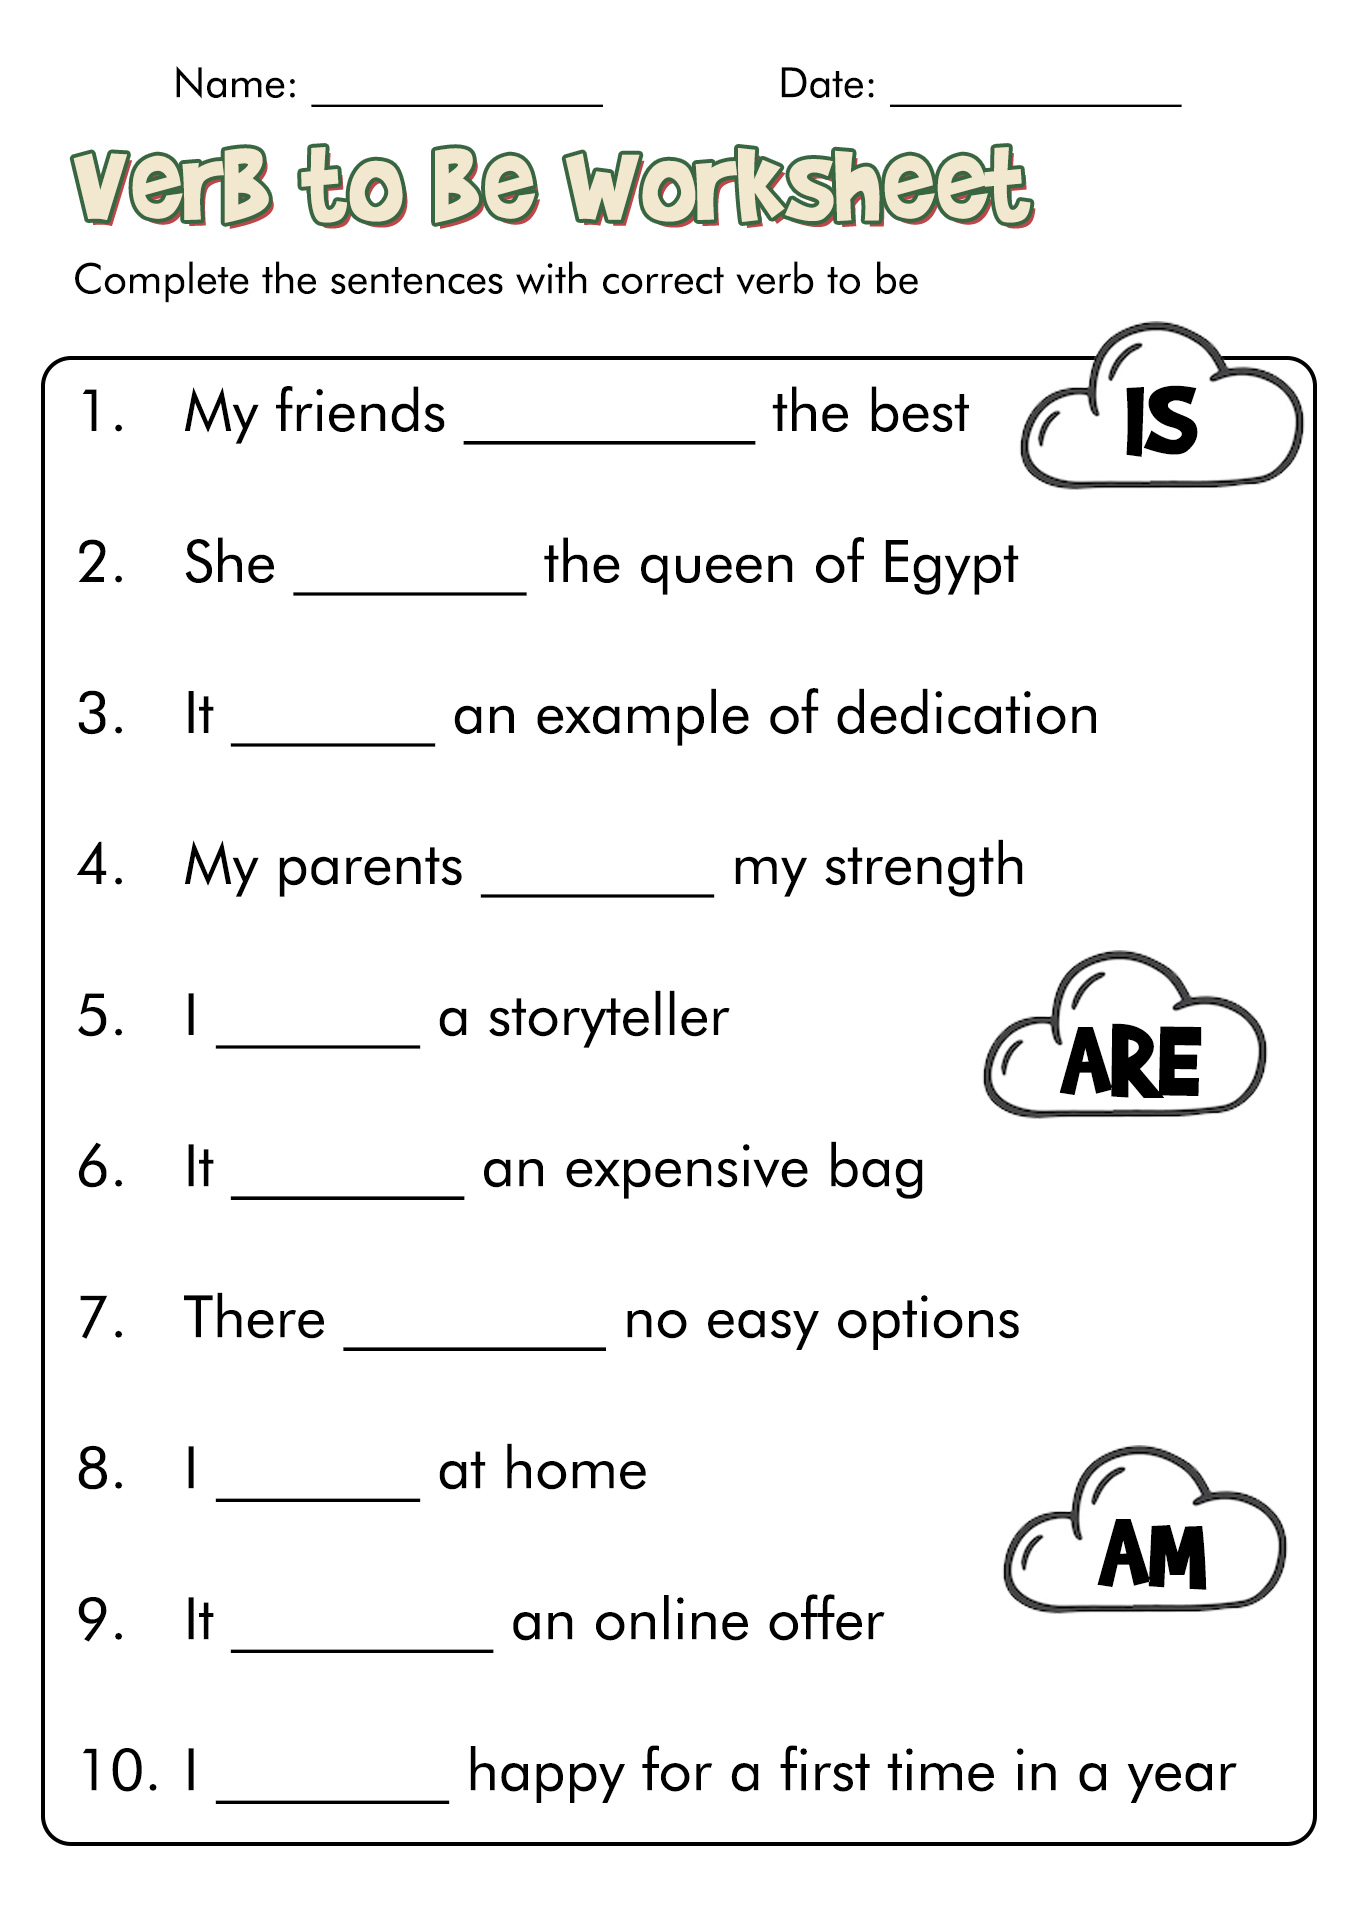 20-best-images-of-punctuation-worksheets-for-grade-5-5th-grade-paragraph-writing-worksheets